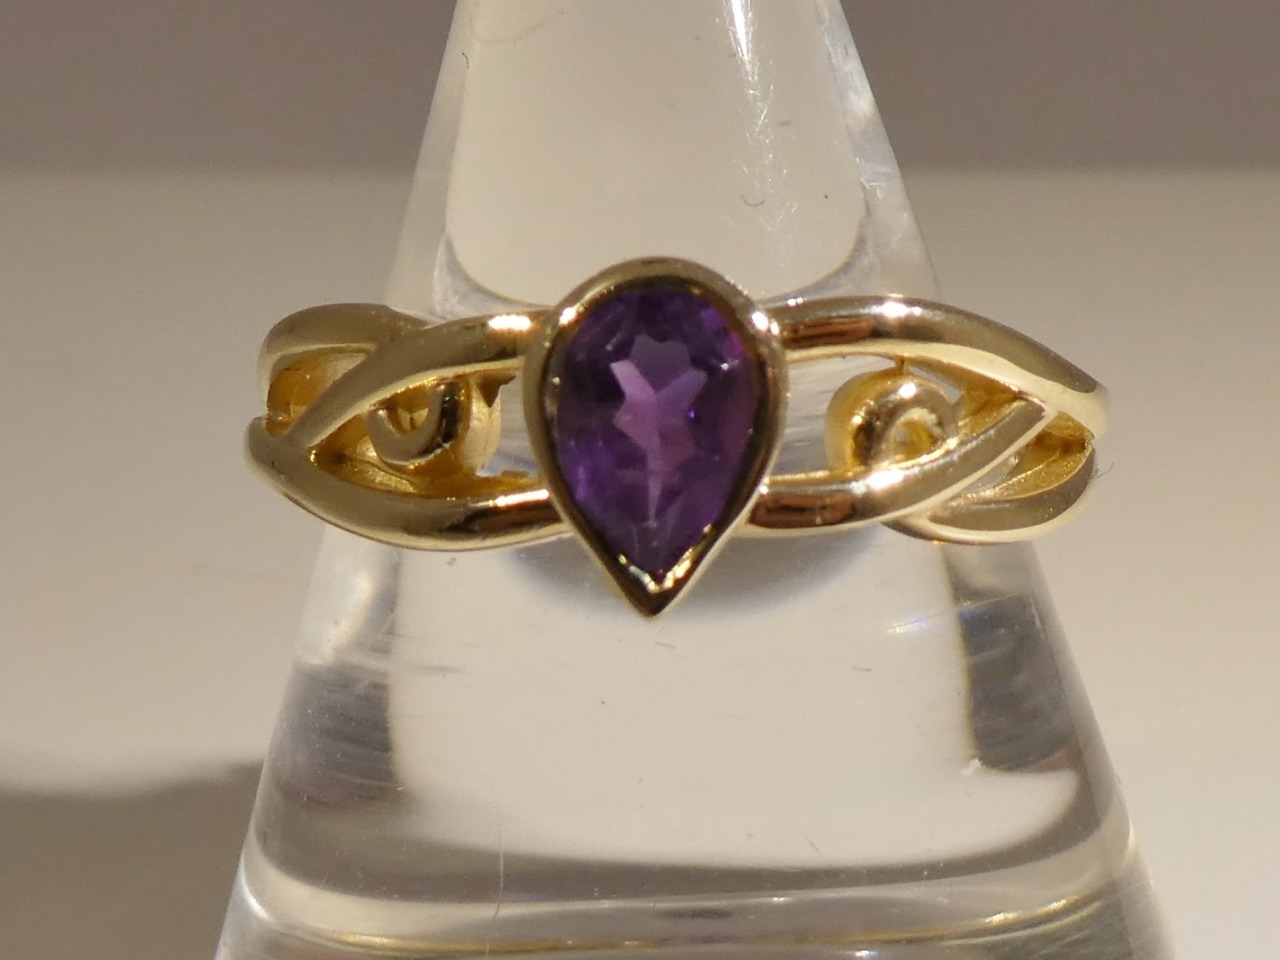 Amethyst rings for women, 925 solid sterling silver ring, purple gemstone  ring, Boho ring jewelry, Gift for Her, All Rings US Size Available  (Sterling Silver, U) : Amazon.co.uk: Fashion